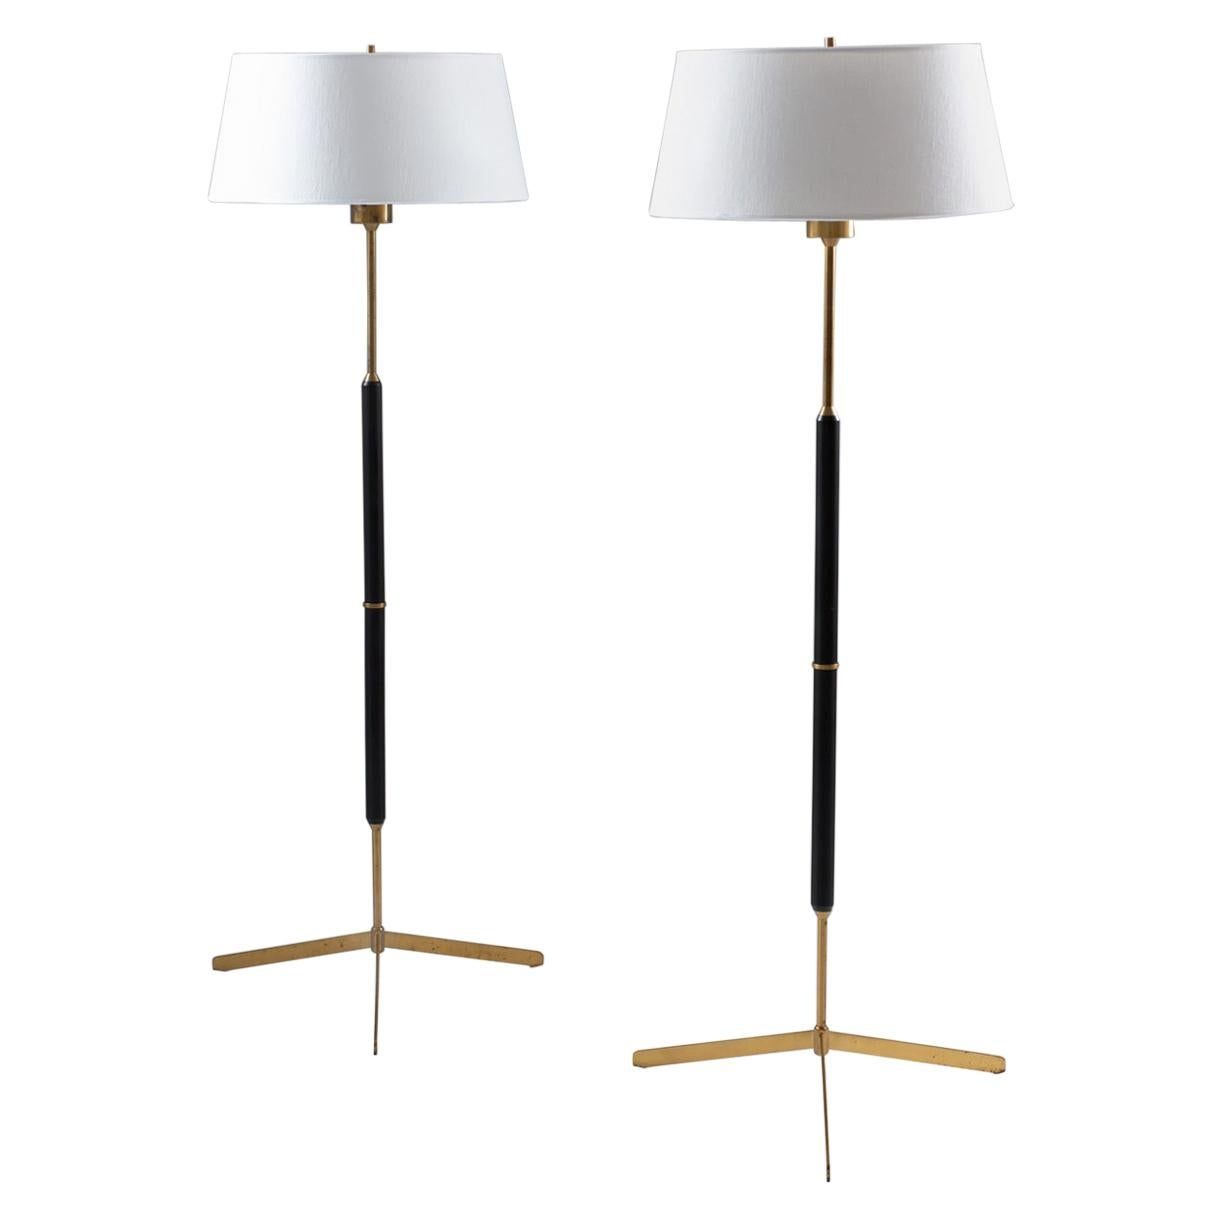 Scandinavian Midcentury Floor Lamps In Brass And Woodbergboms, Sweden  For Sale At 1stdibs | Mid Century Modern Floor Lamp, Scandanavian Floor Lamp Inside Mid Century Floor Lamps (View 14 of 15)